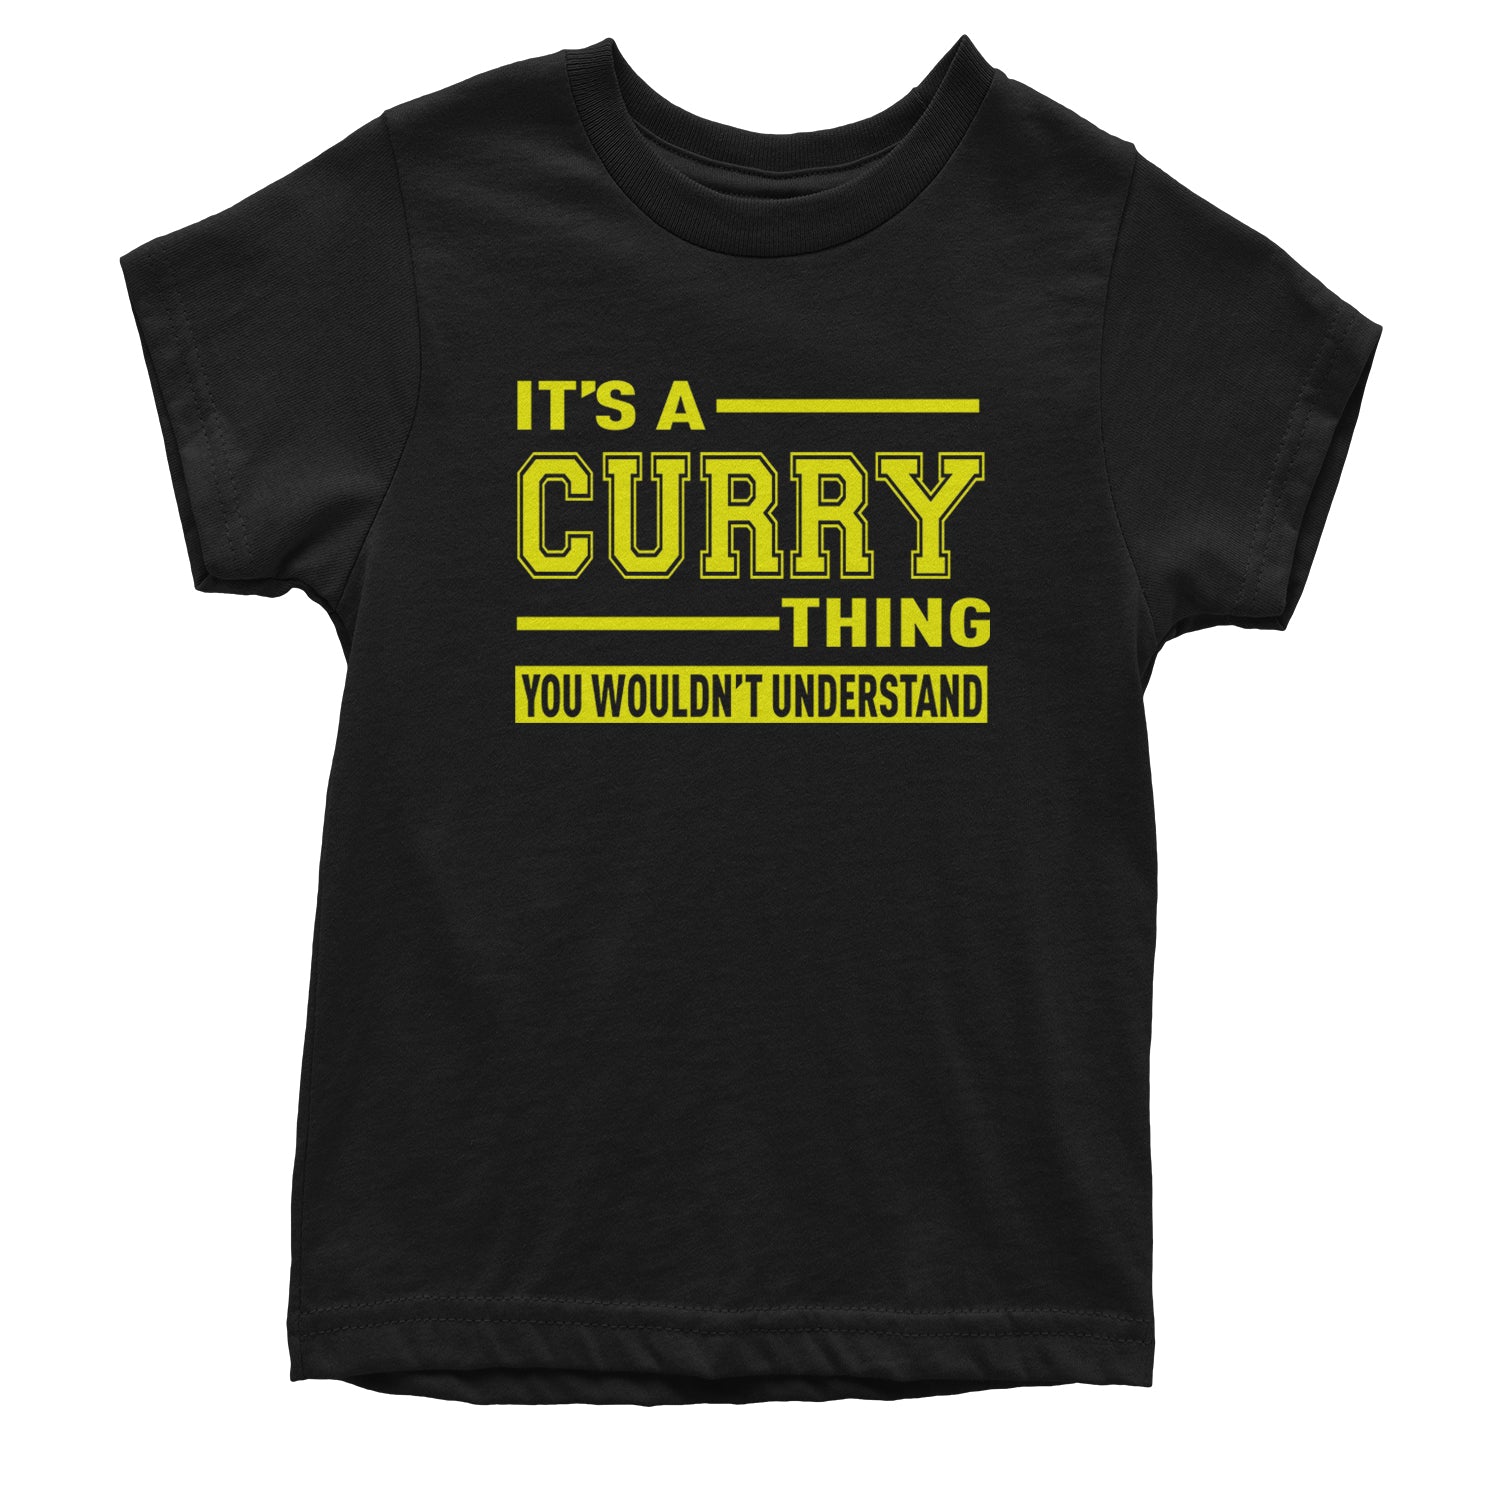 It's A Curry Thing, You Wouldn't Understand Basketball Youth T-shirt